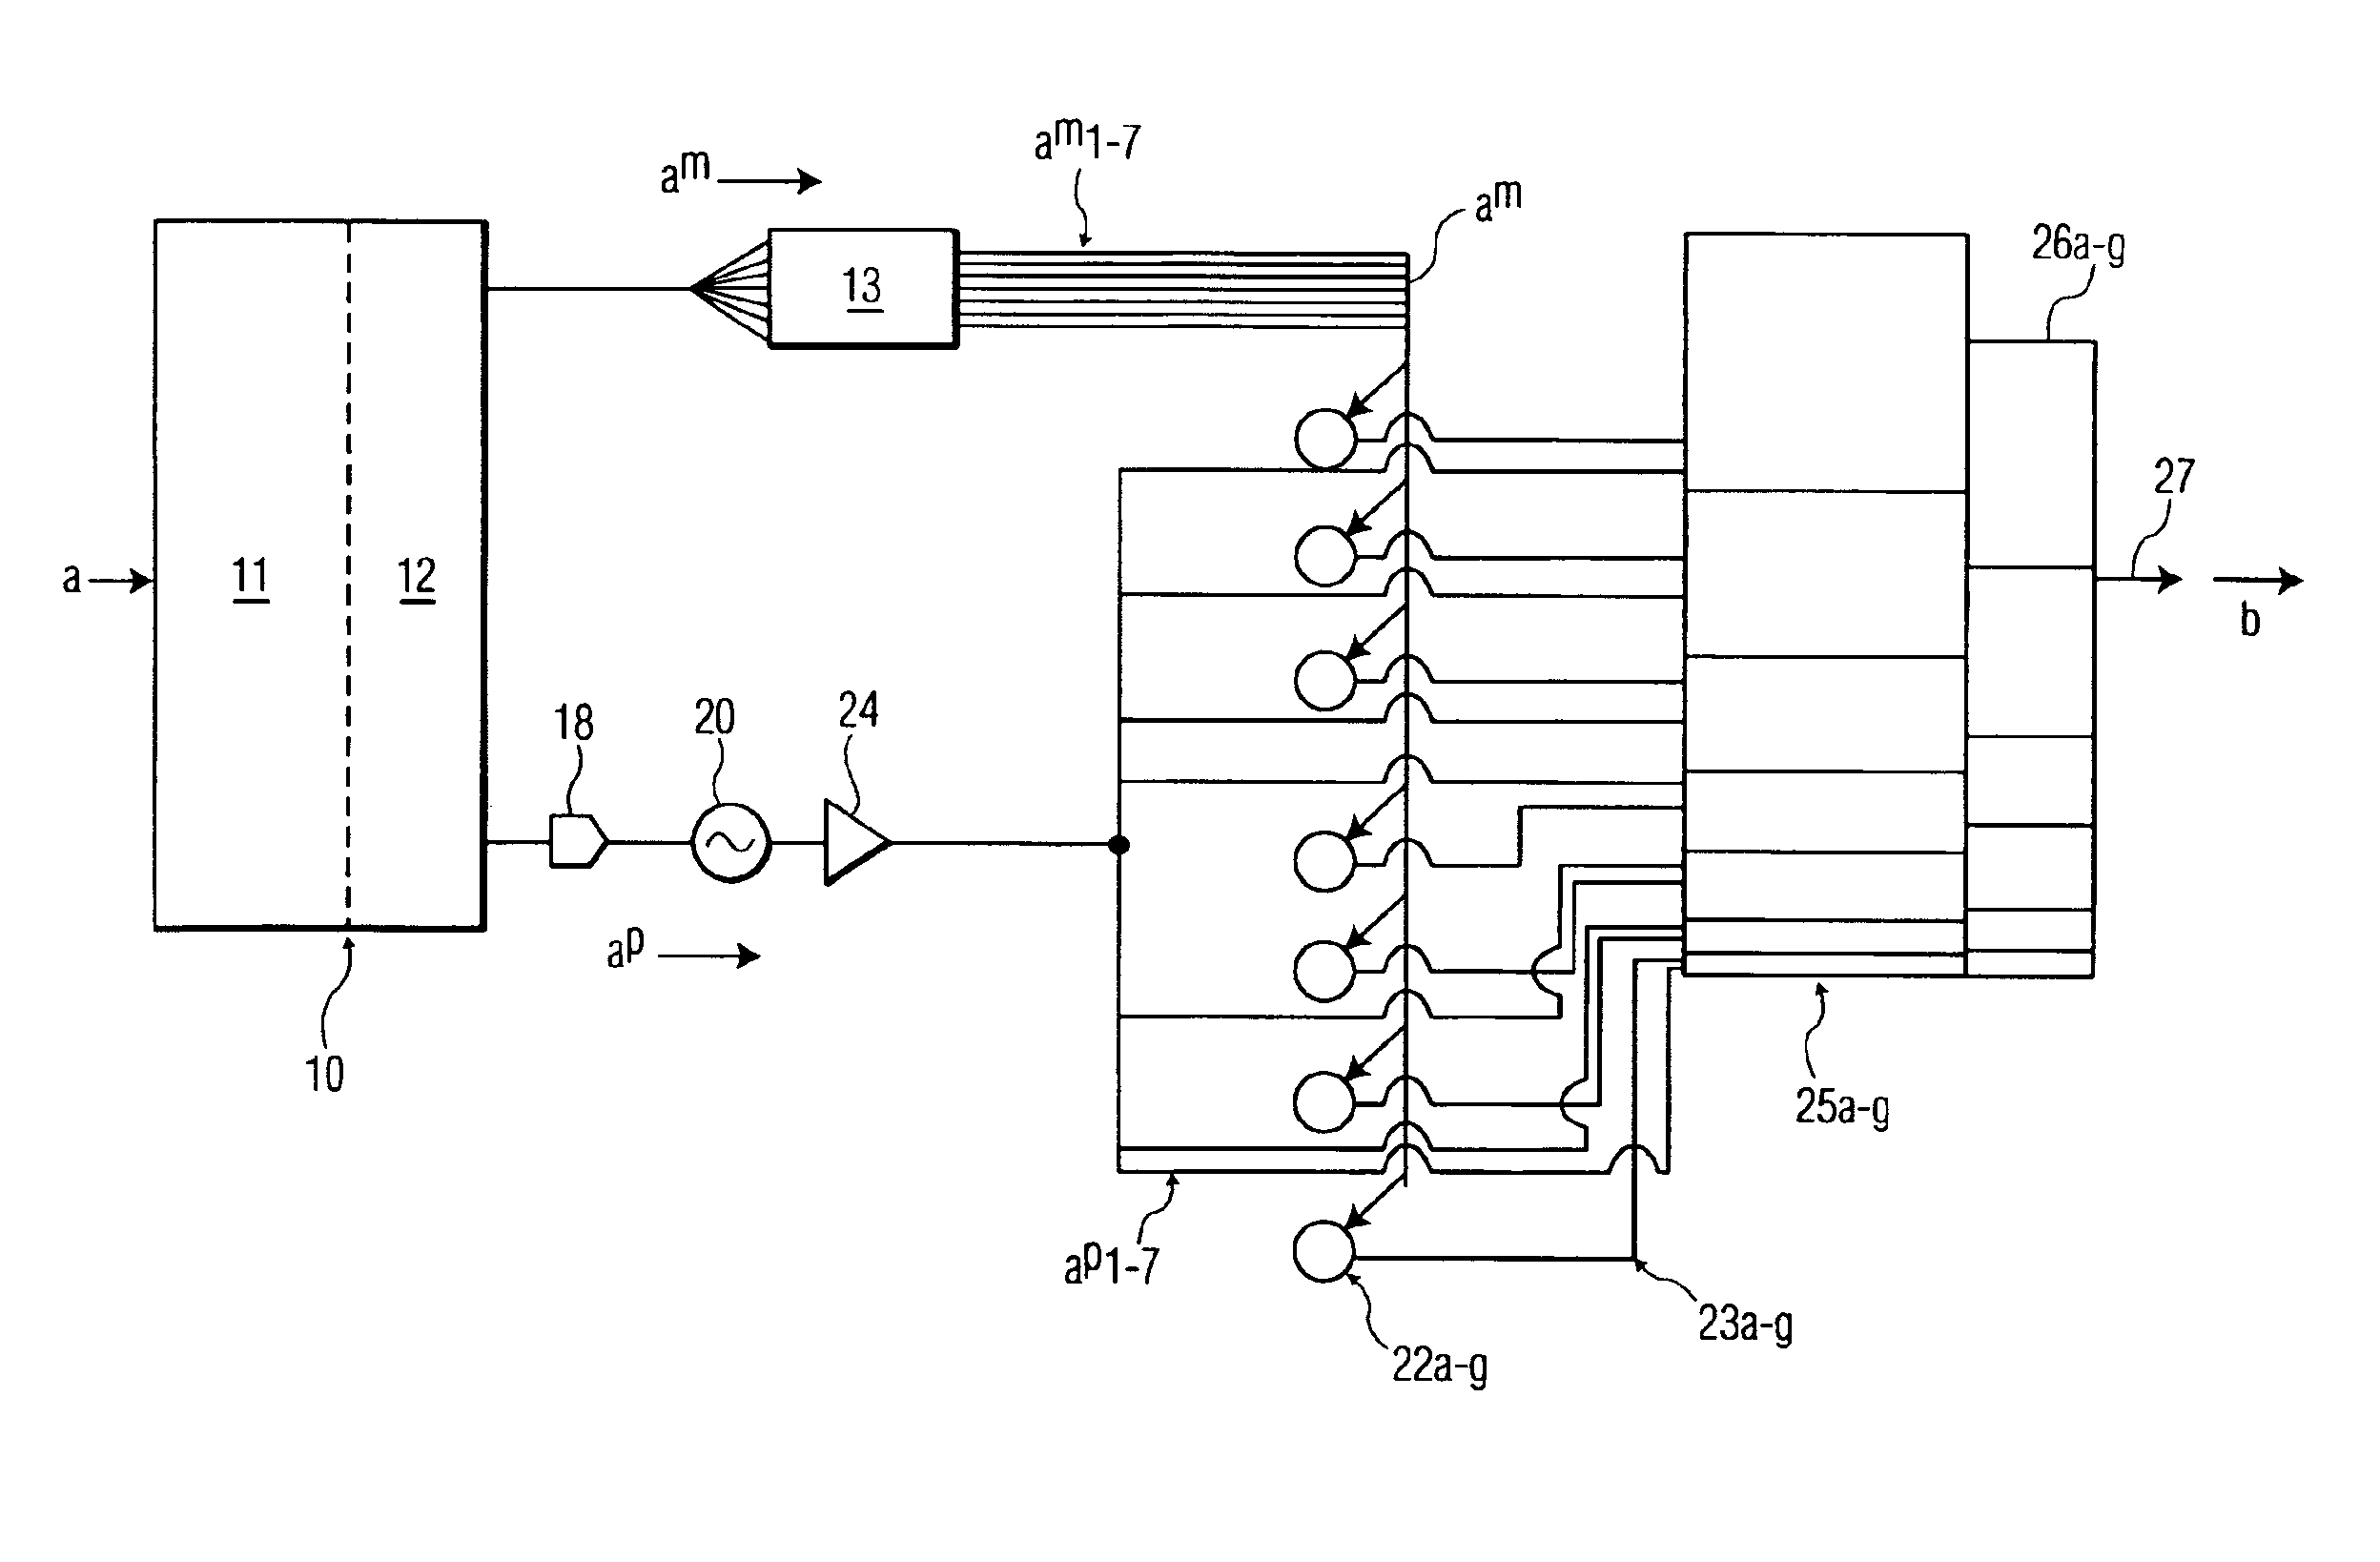 Apparatus, methods and articles of manufacture for electromagnetic processing